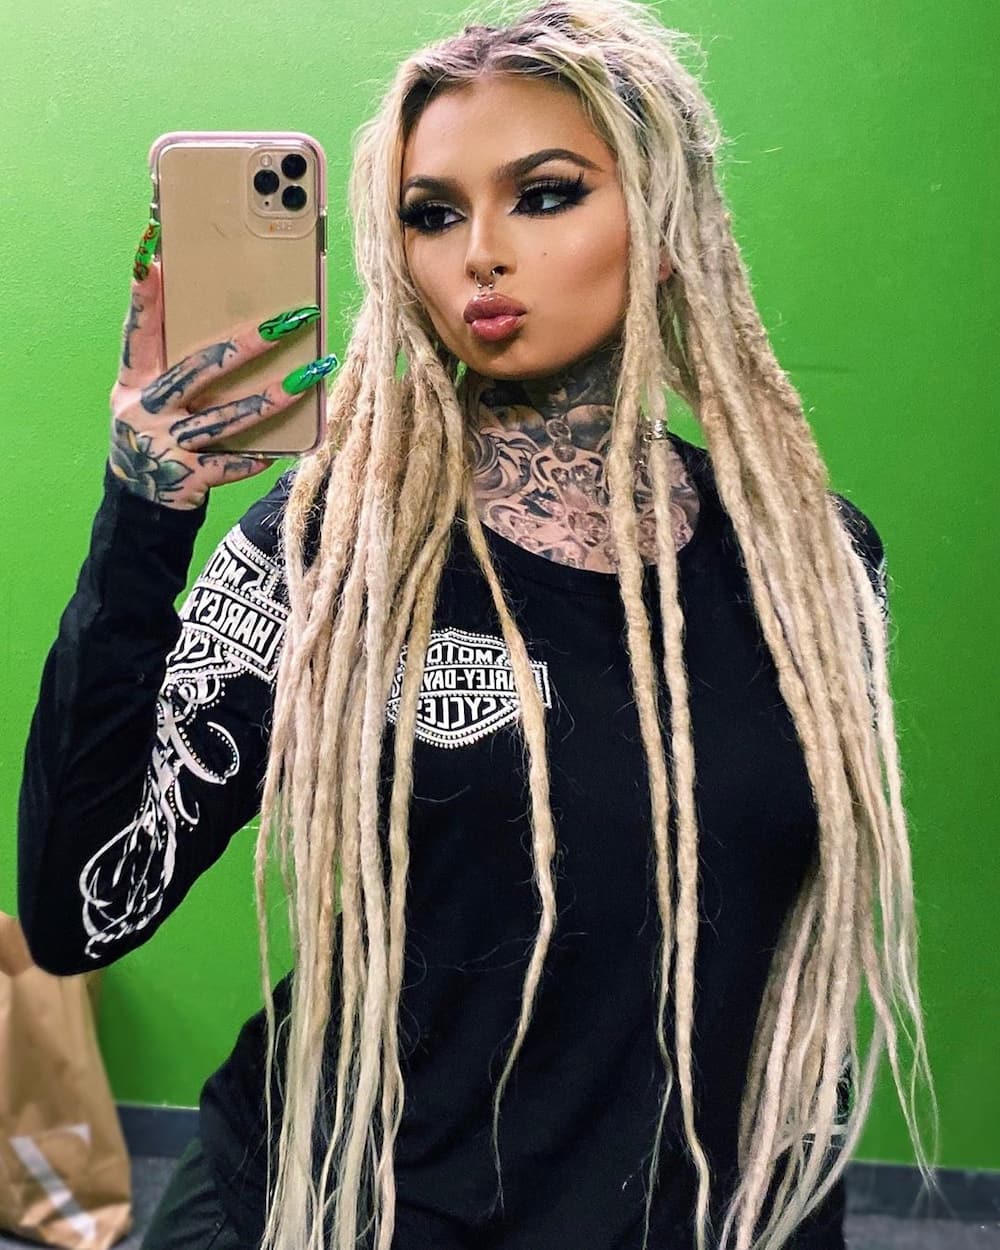 Zhavia Ethnicity, nationality, parents, siblings, background